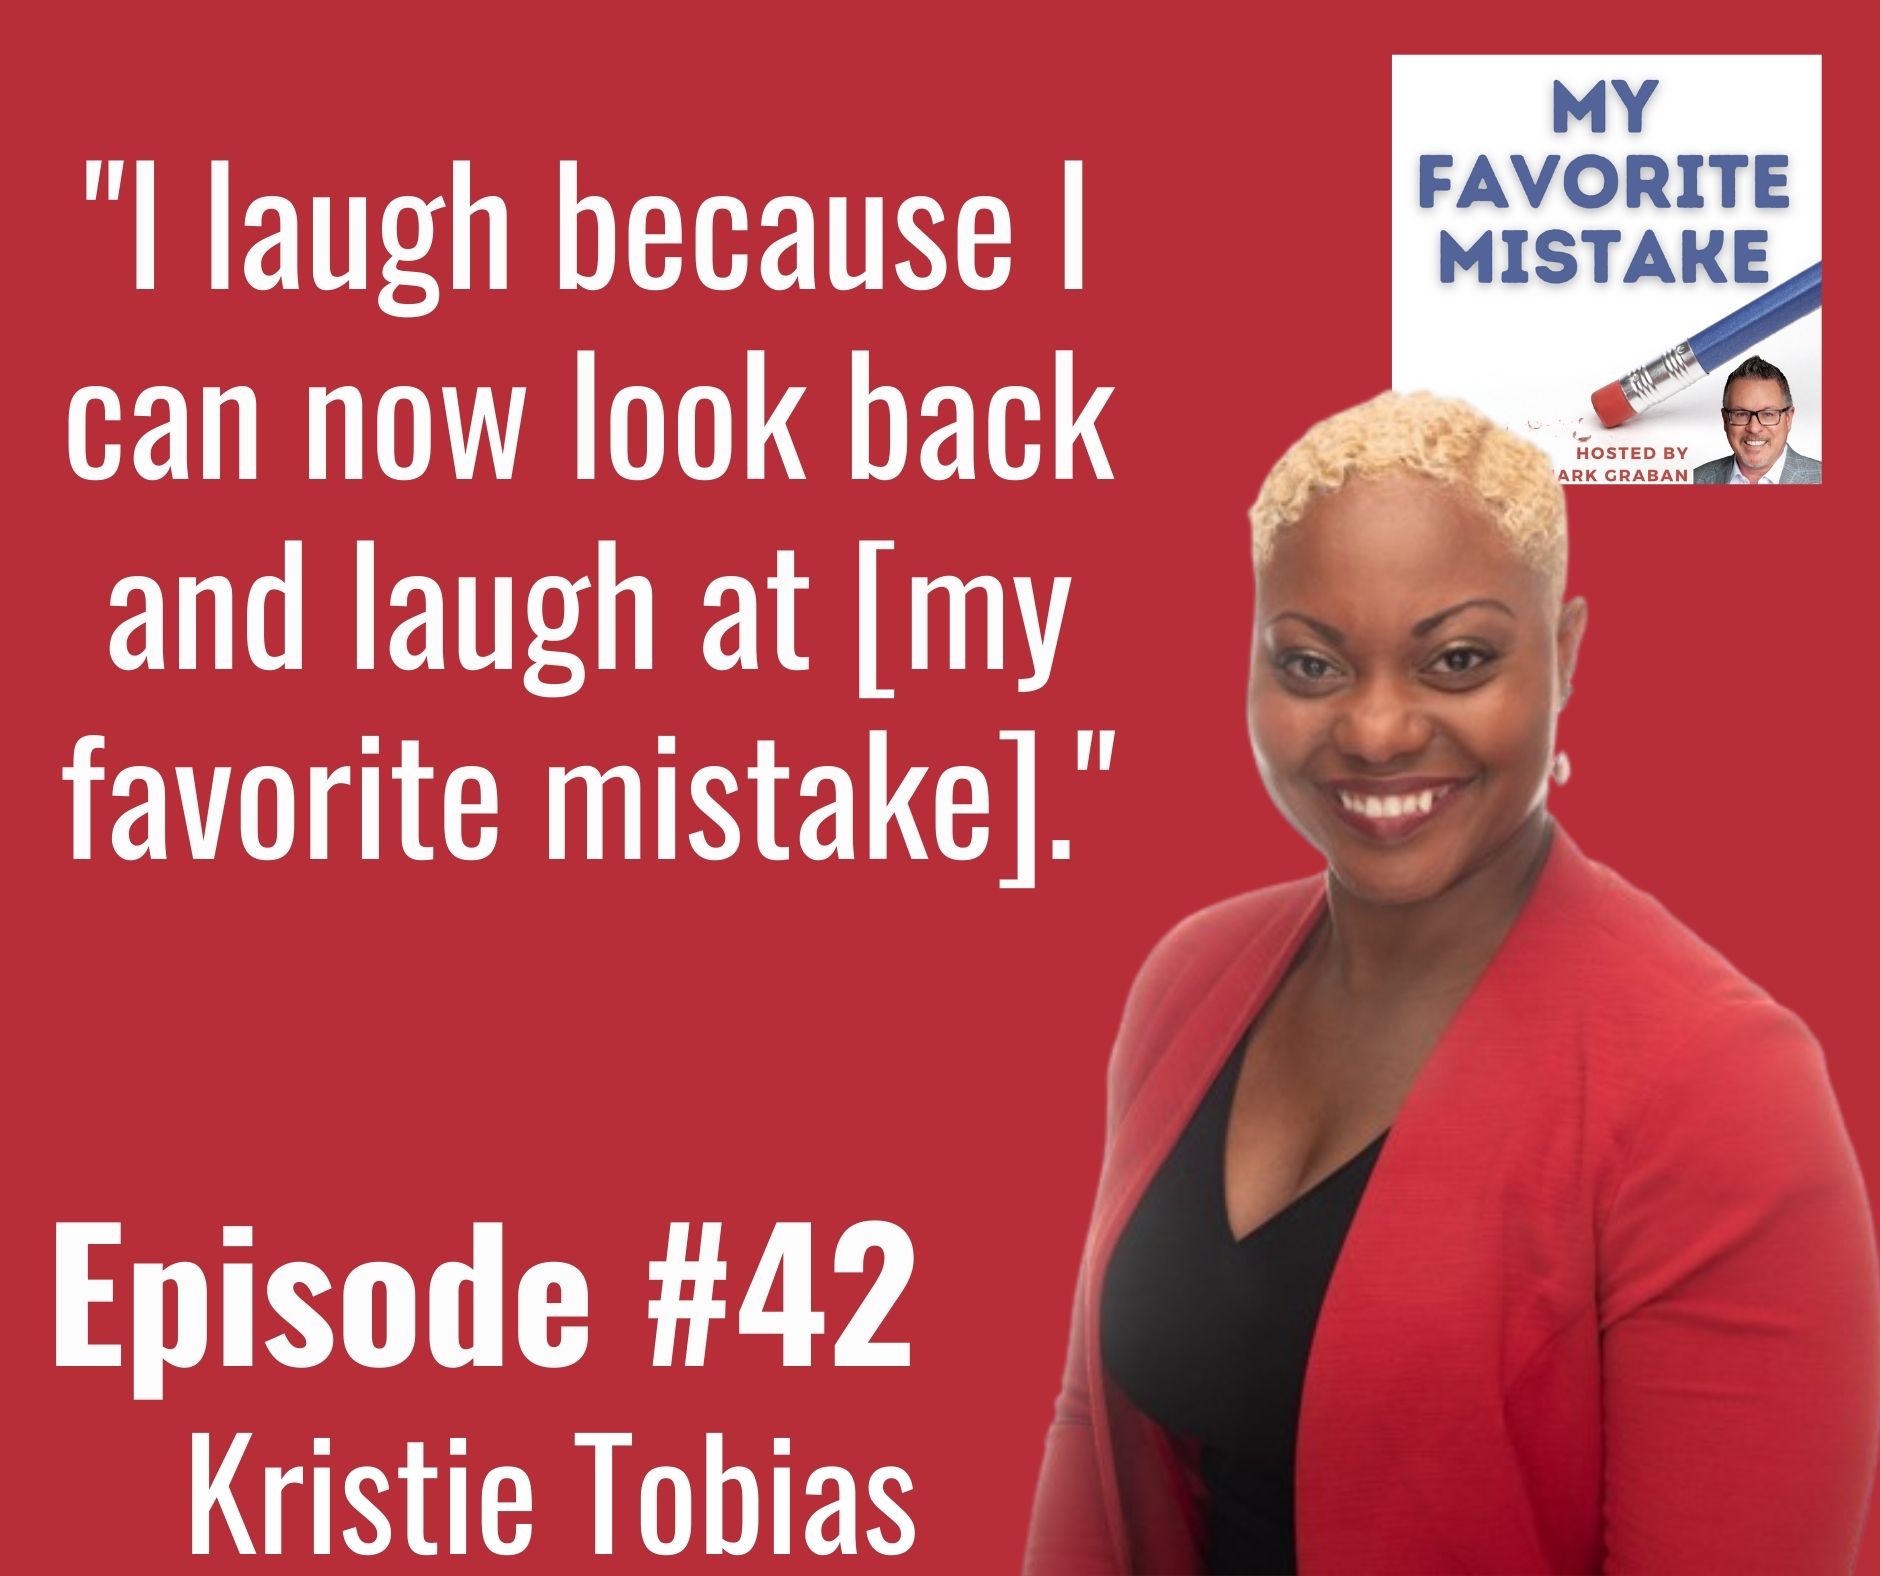 "I laugh because I can now look back and laugh at [my favorite mistake]."